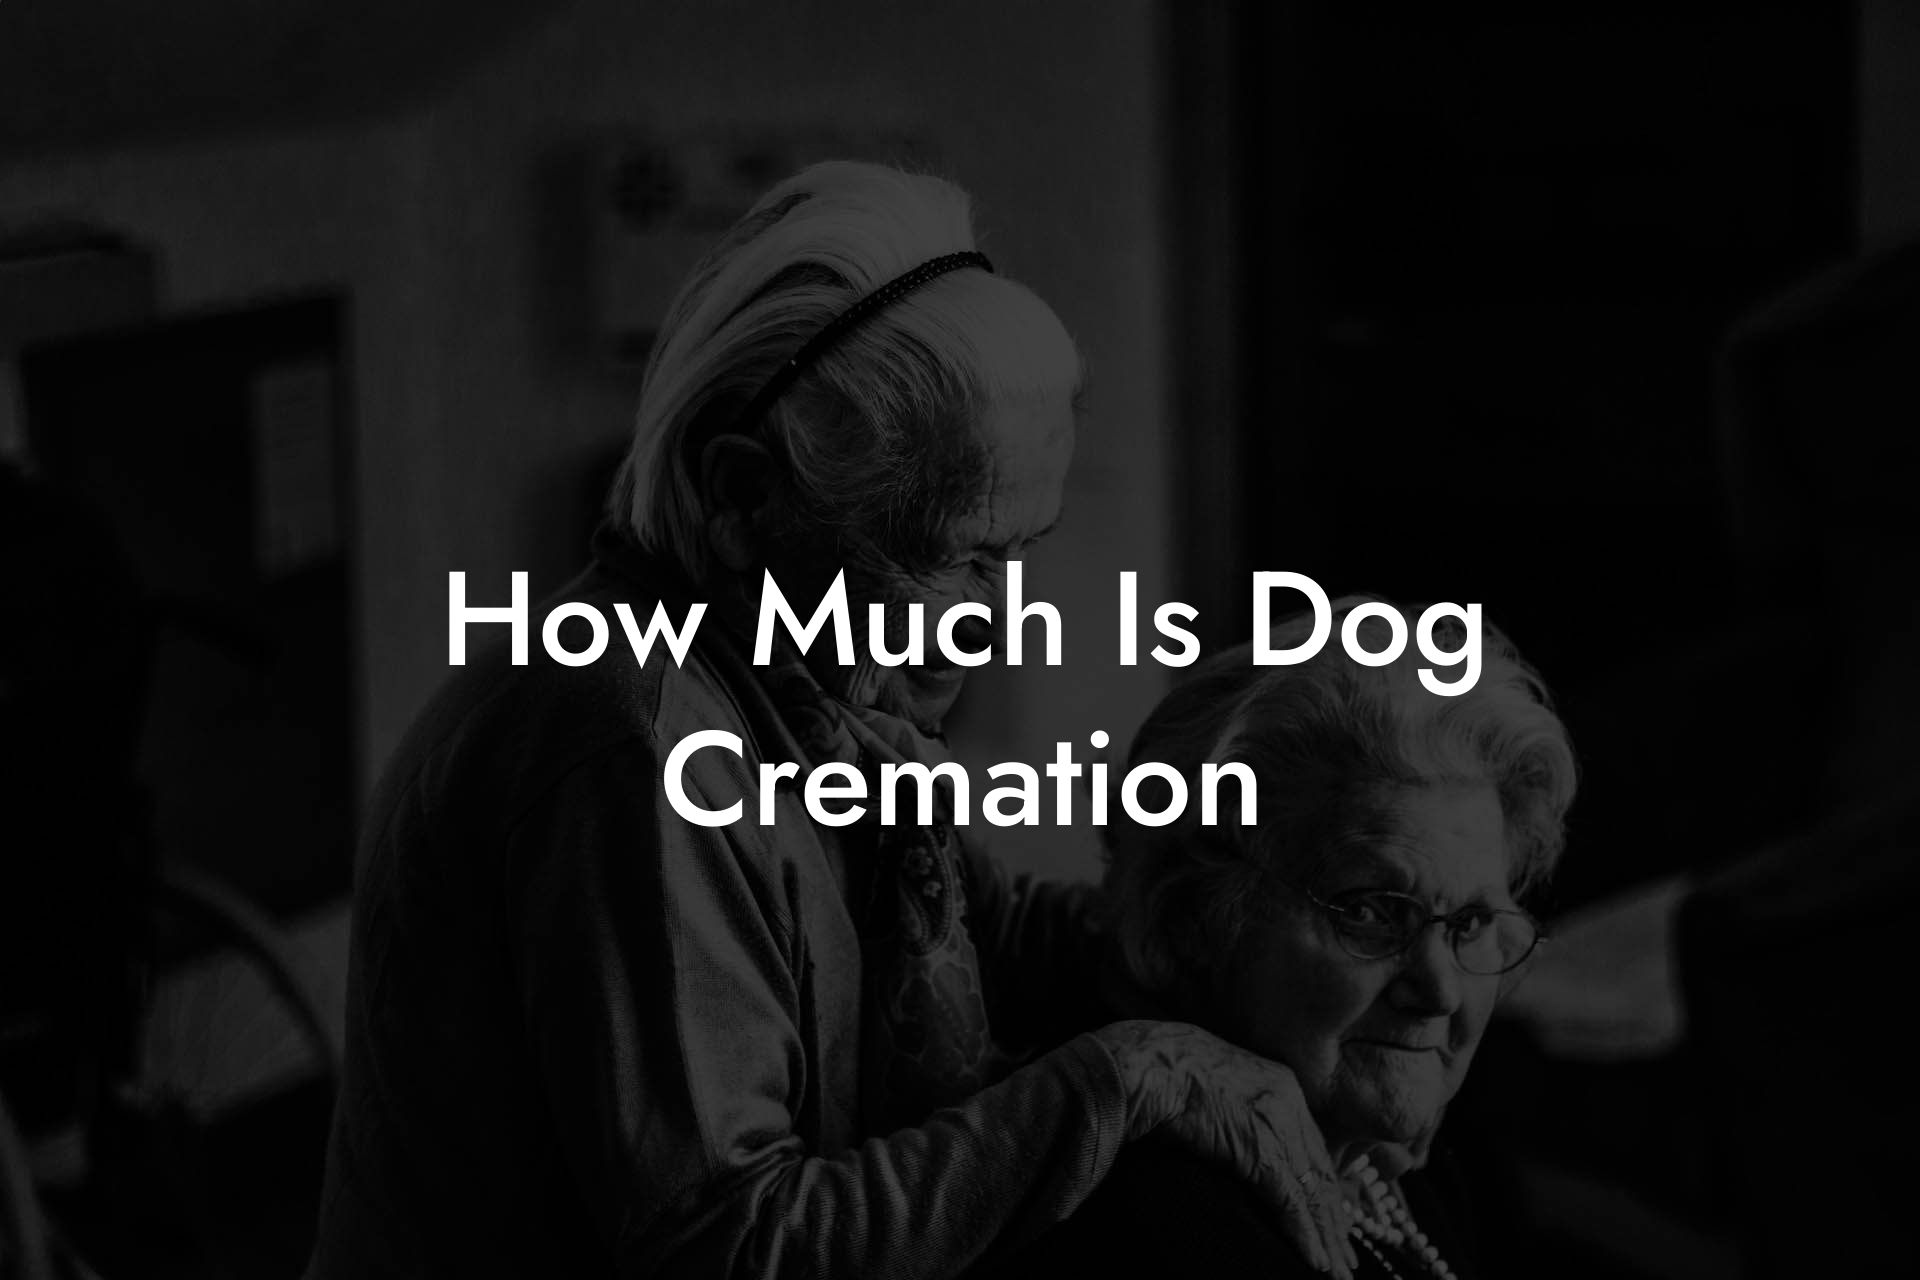 How Much Is Dog Cremation